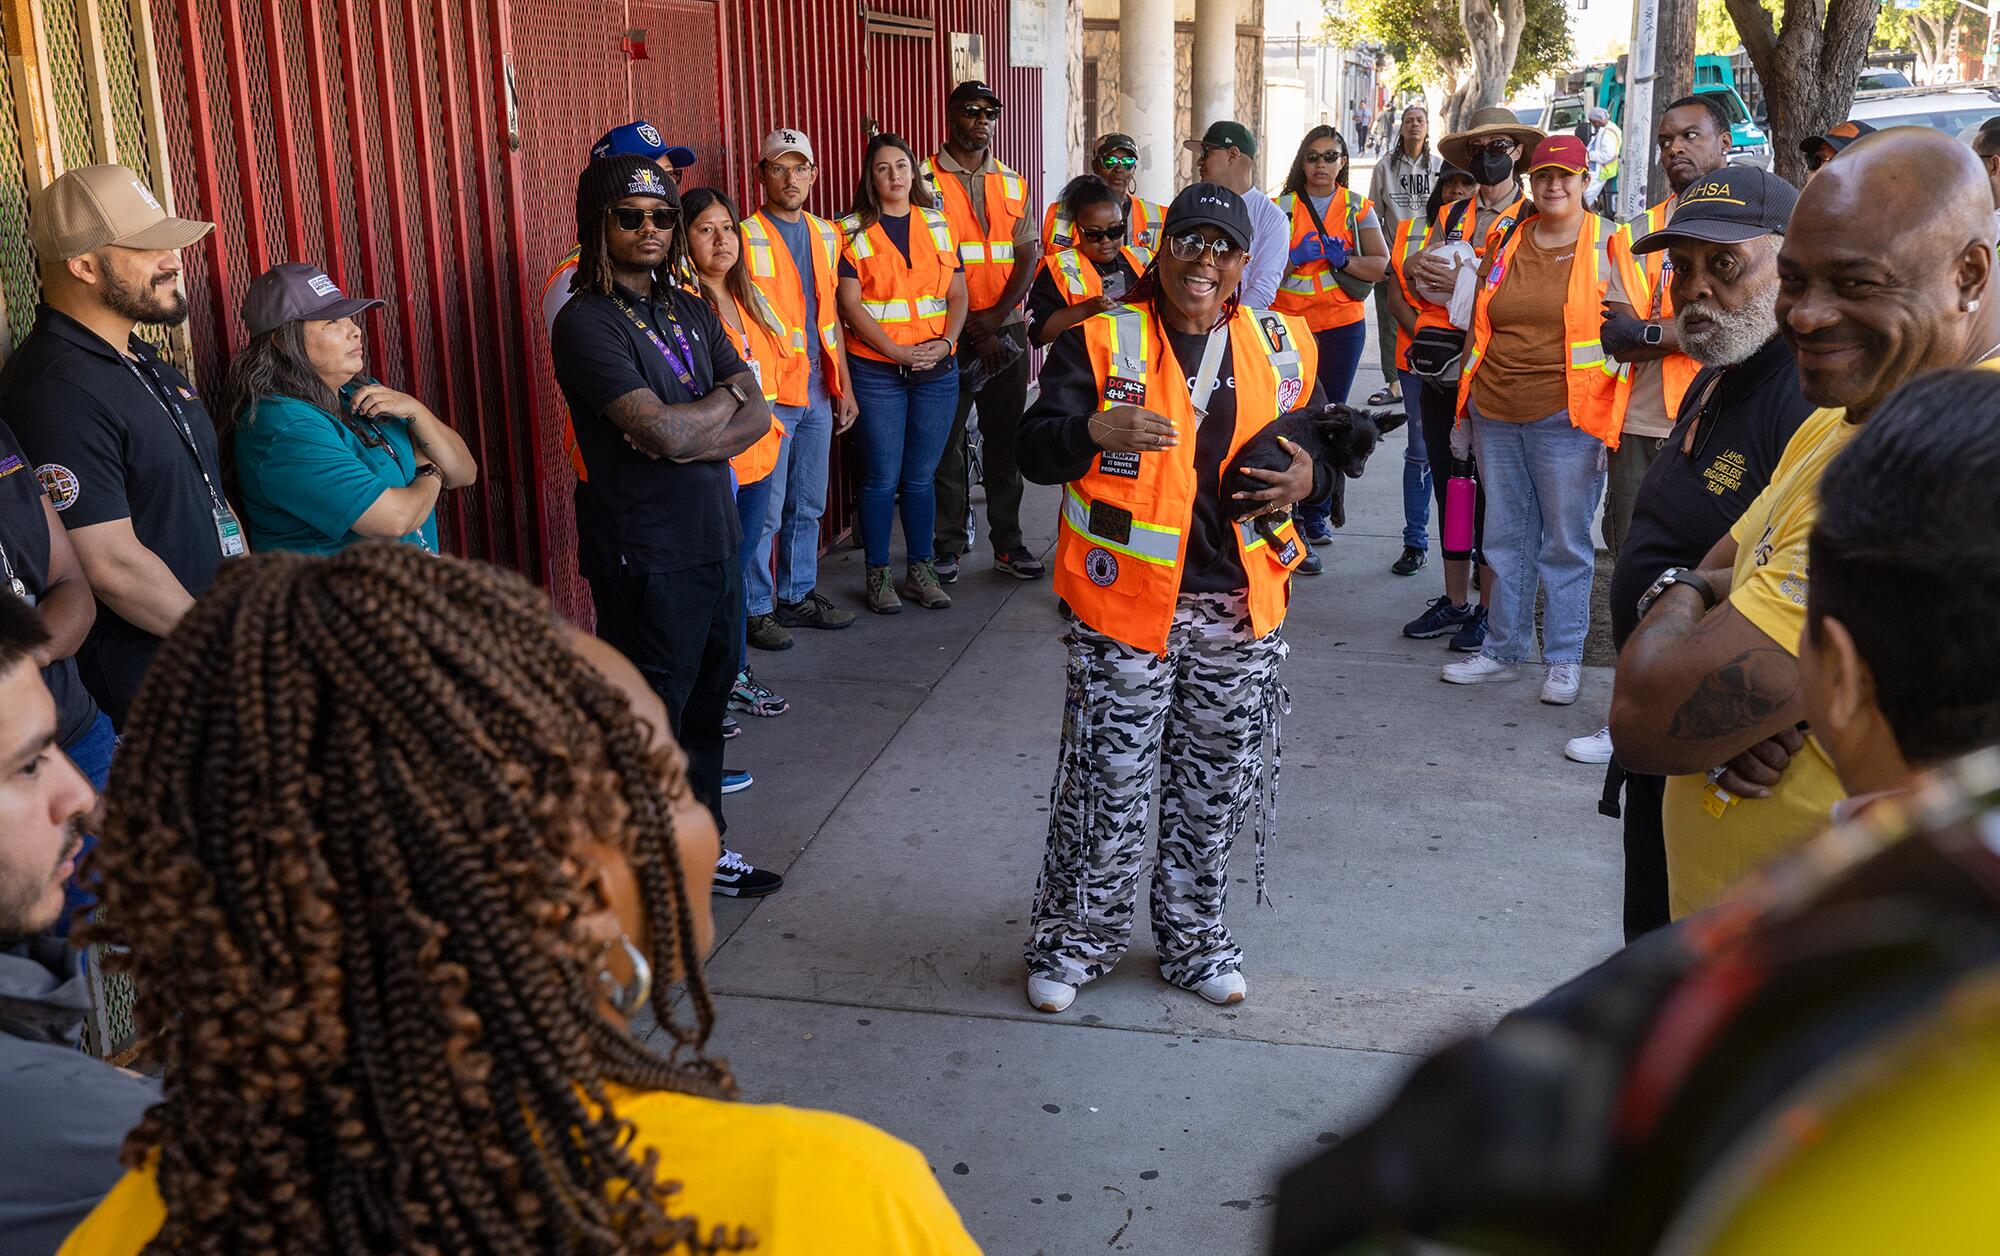 Inside Safe's Annetta Wells instructs employees before entering a homeless encampment in South Los Angeles